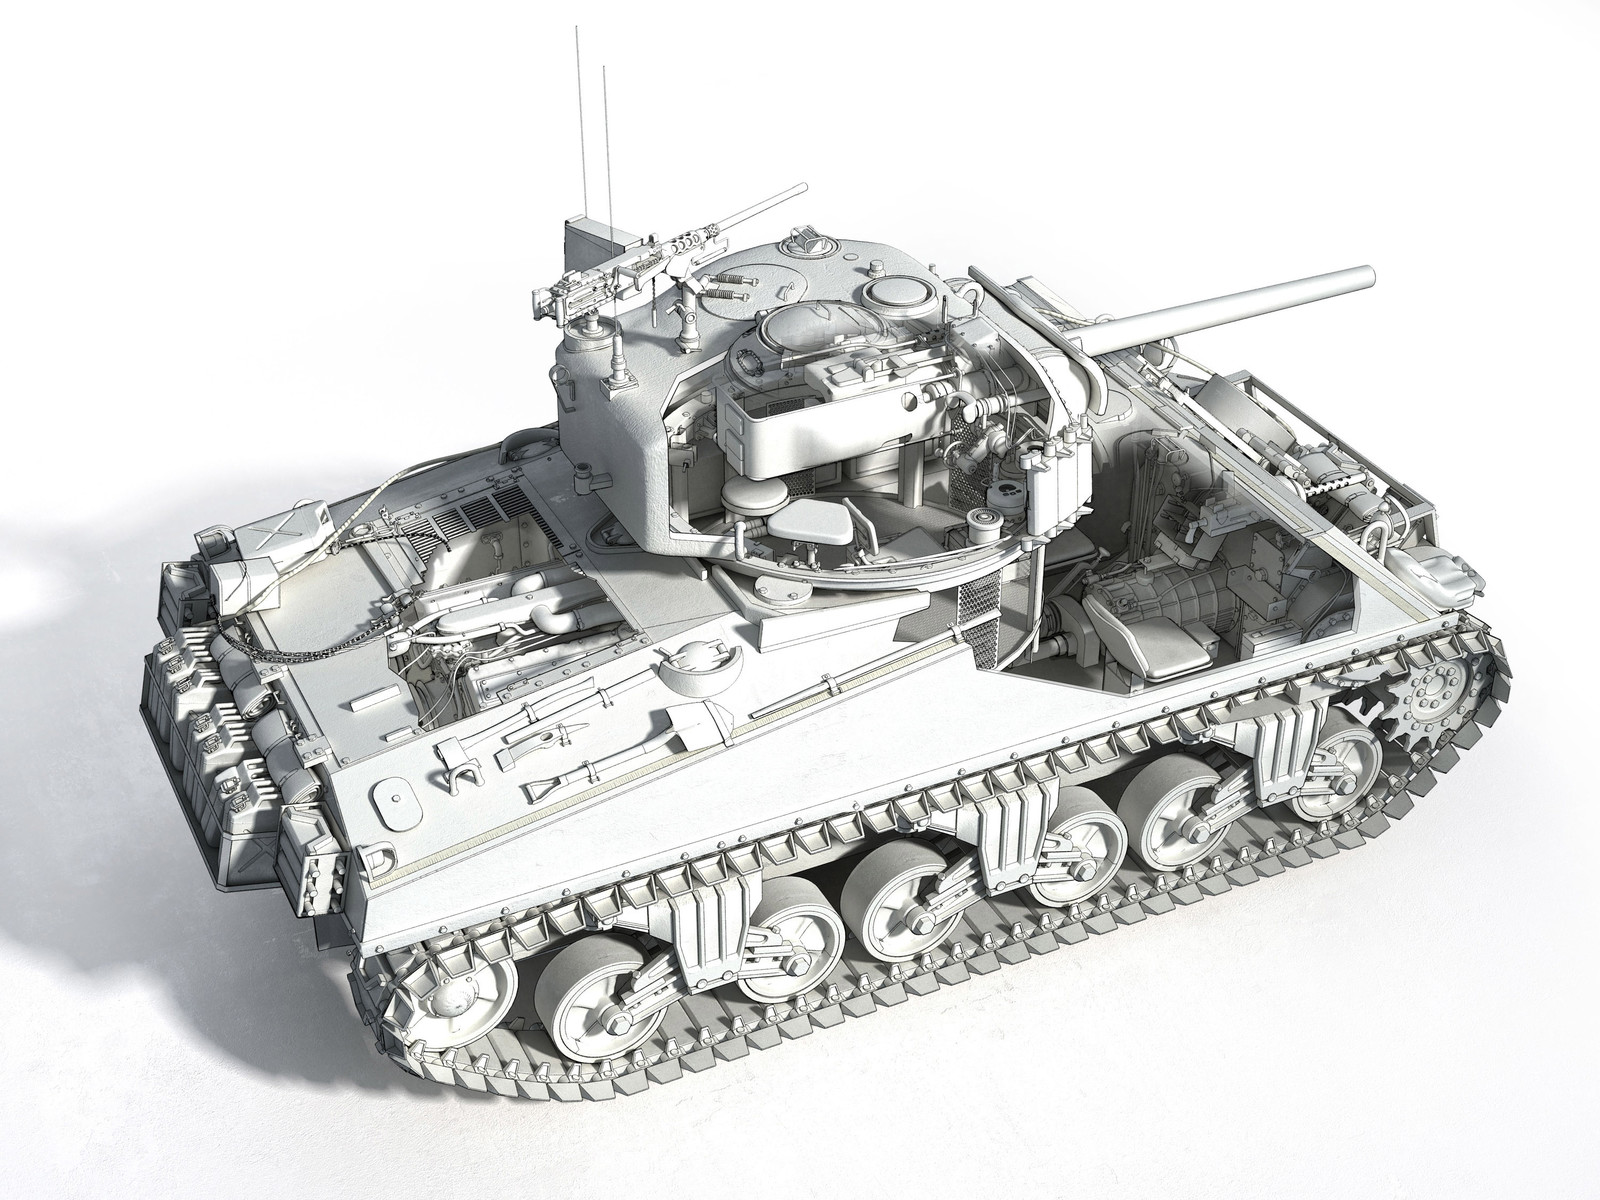 Sherman tank completed in line for a publisher, used in Sony adverting too!